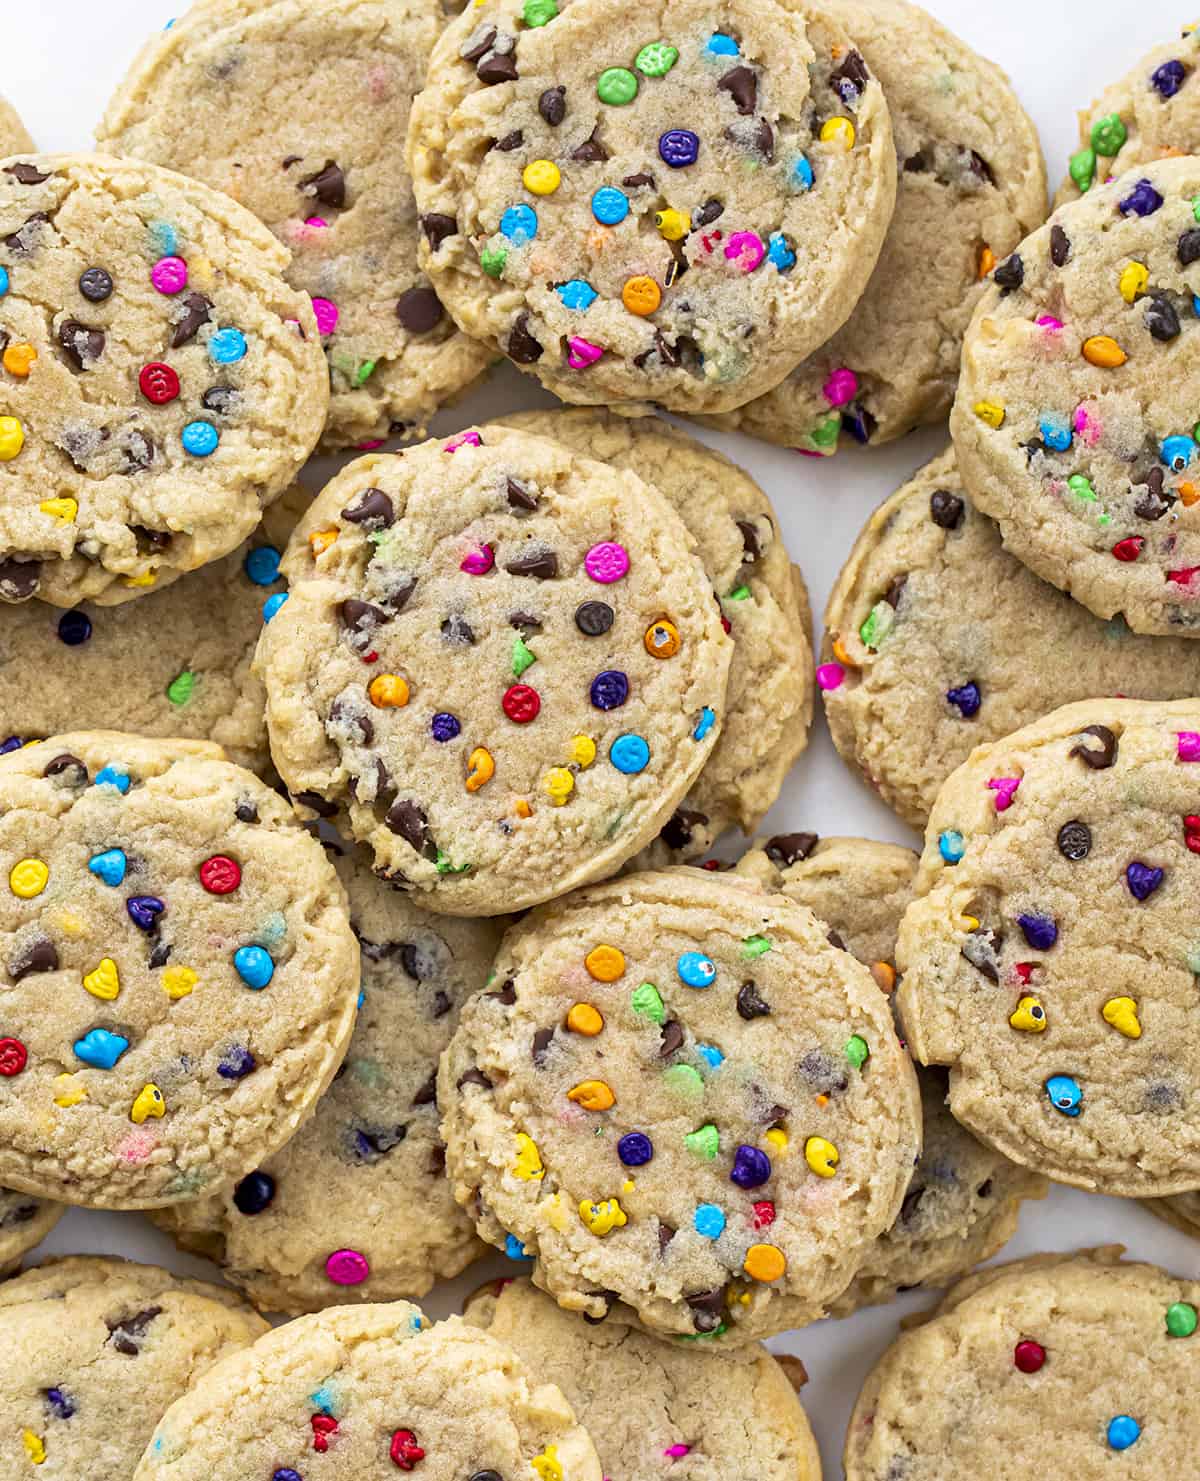 Rainbow Chip Cookies on a White Counter from Overhead. Baking, Cookies, Cookie Recipes, Dessert, Rainbow Chip, Rainbow Cookies, Rainbow Chip Chocolate Chip Cookies, Soft Cookies, Chewy Cookies, Cookie Dough, i am baker, iambaker